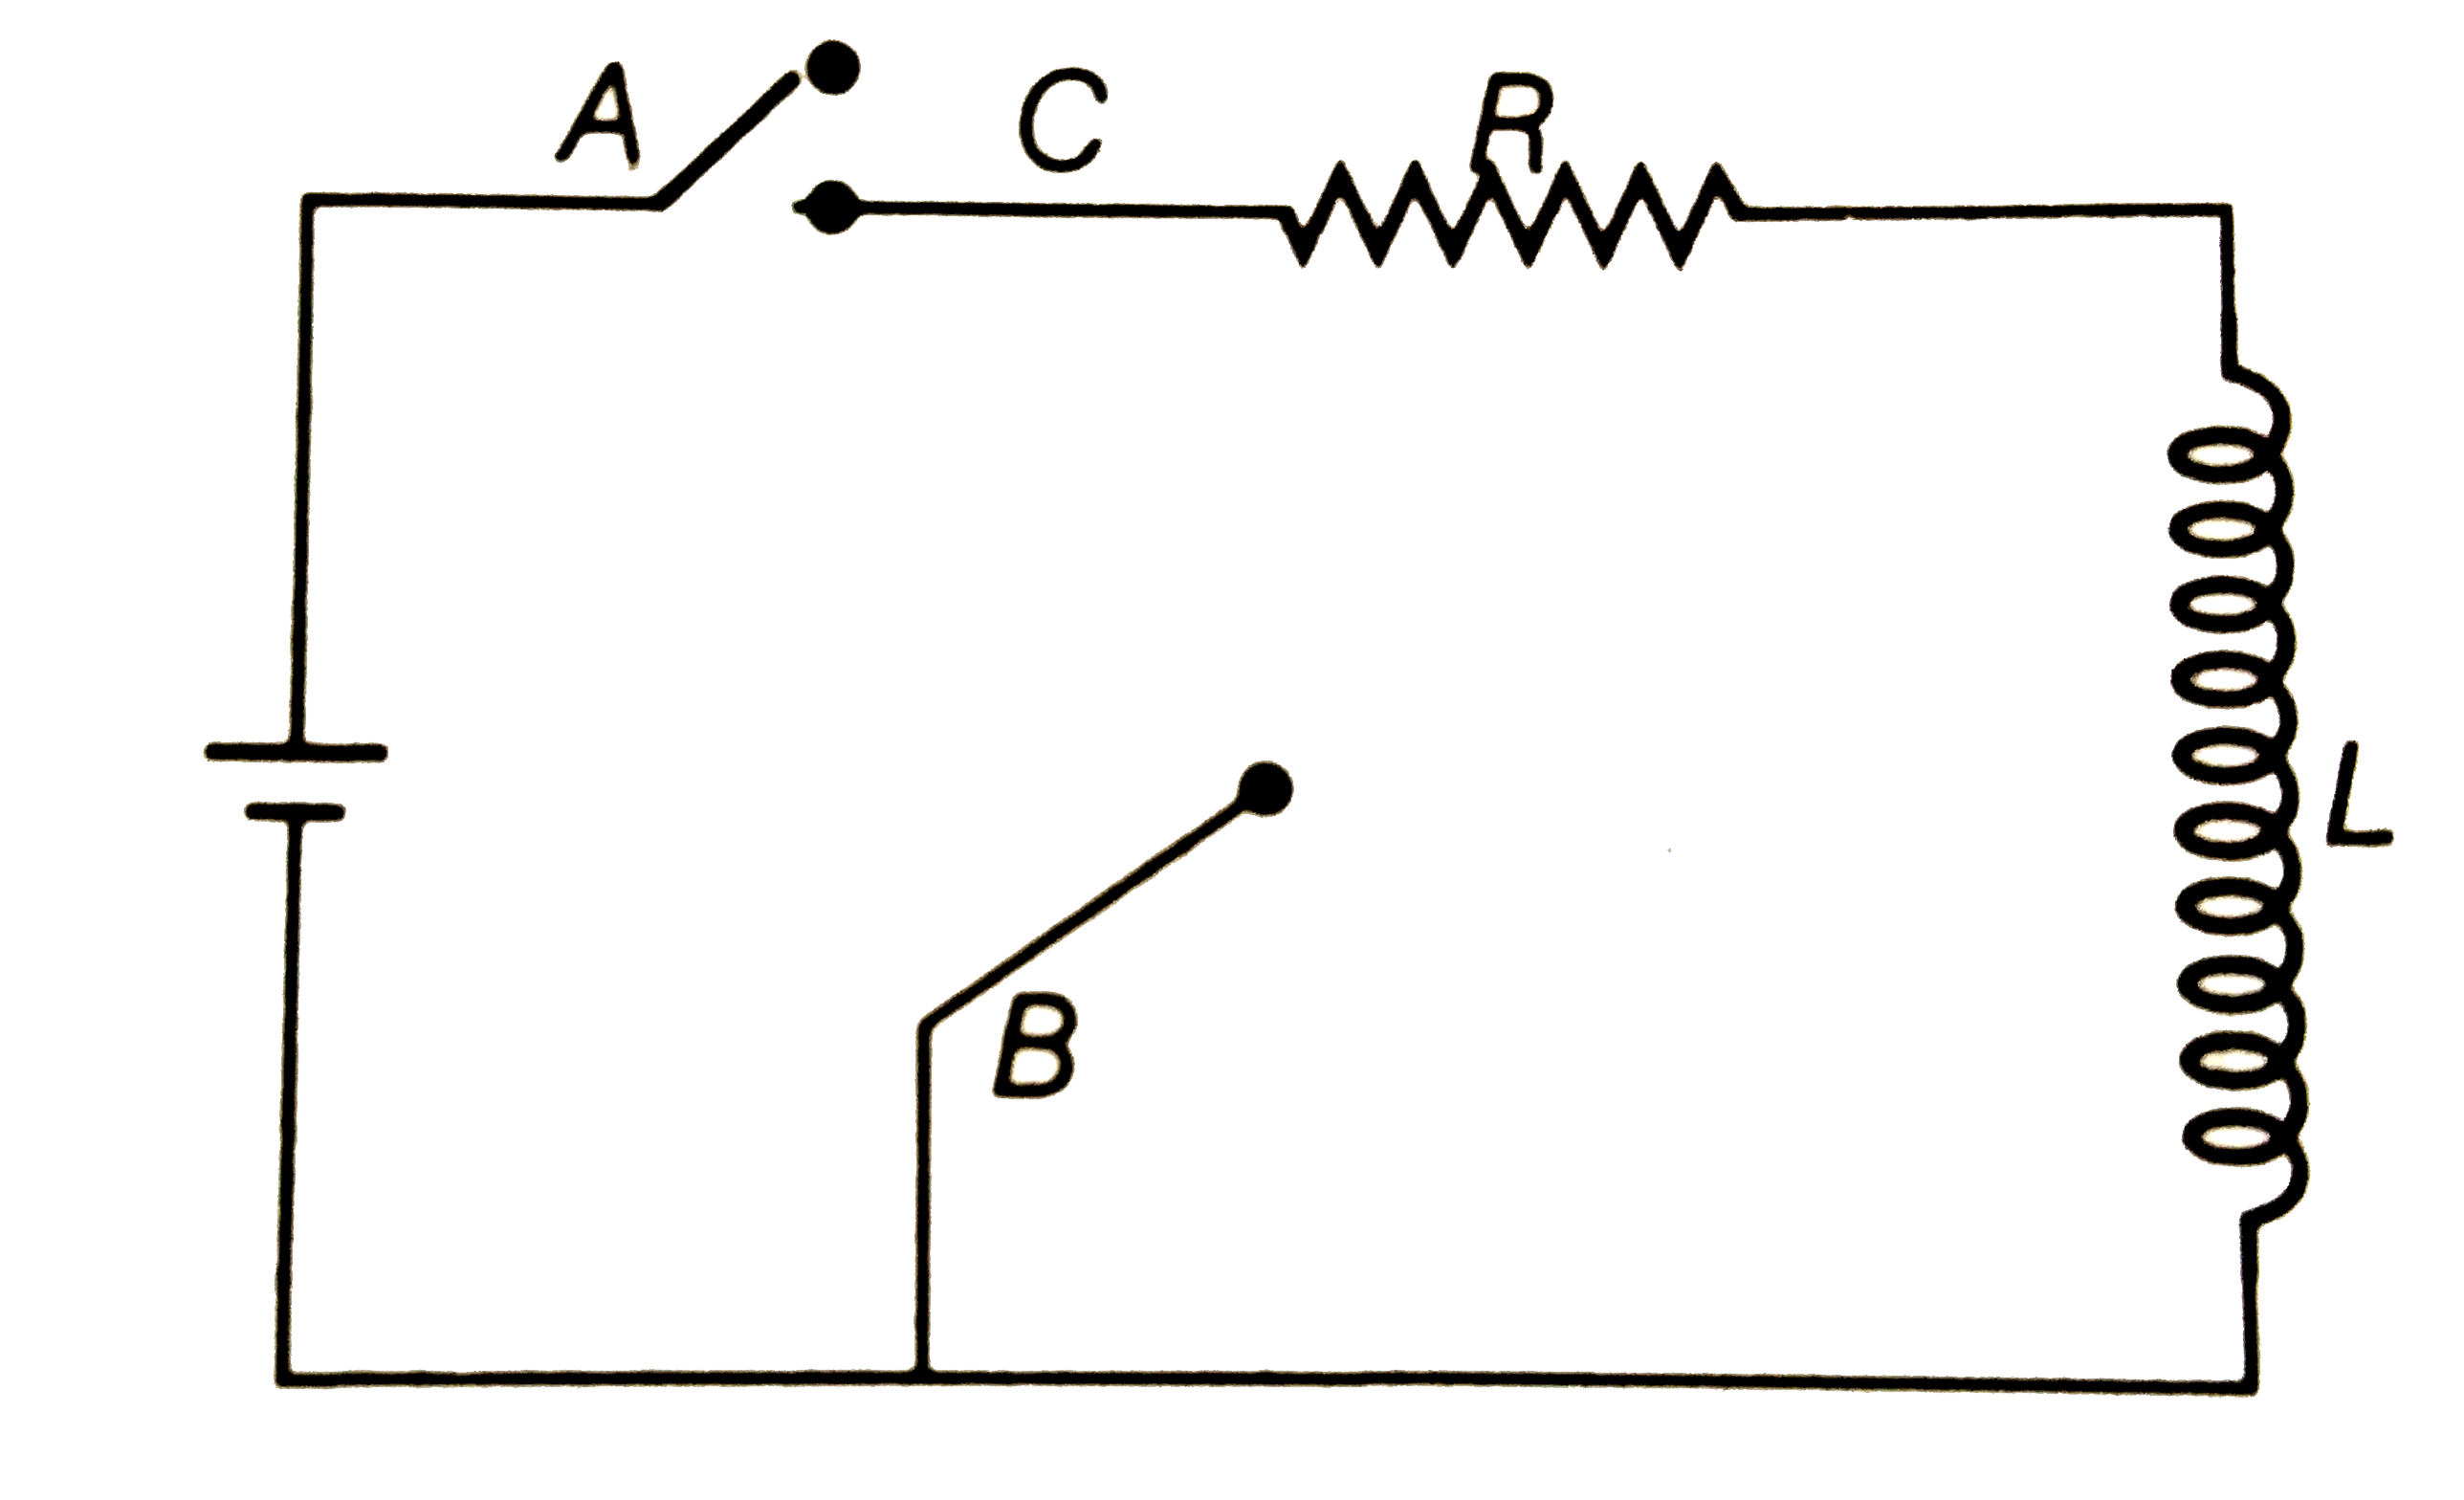 In the circuit shown here, the point C is kept connected to the point A till the current flowing through the circuit becomes constant. Afterward, suddenly ponit C is disconnected from point A and connected to point B at time t=0. ratio of voltage across resistance and the inductor at t=L/R will be equal to